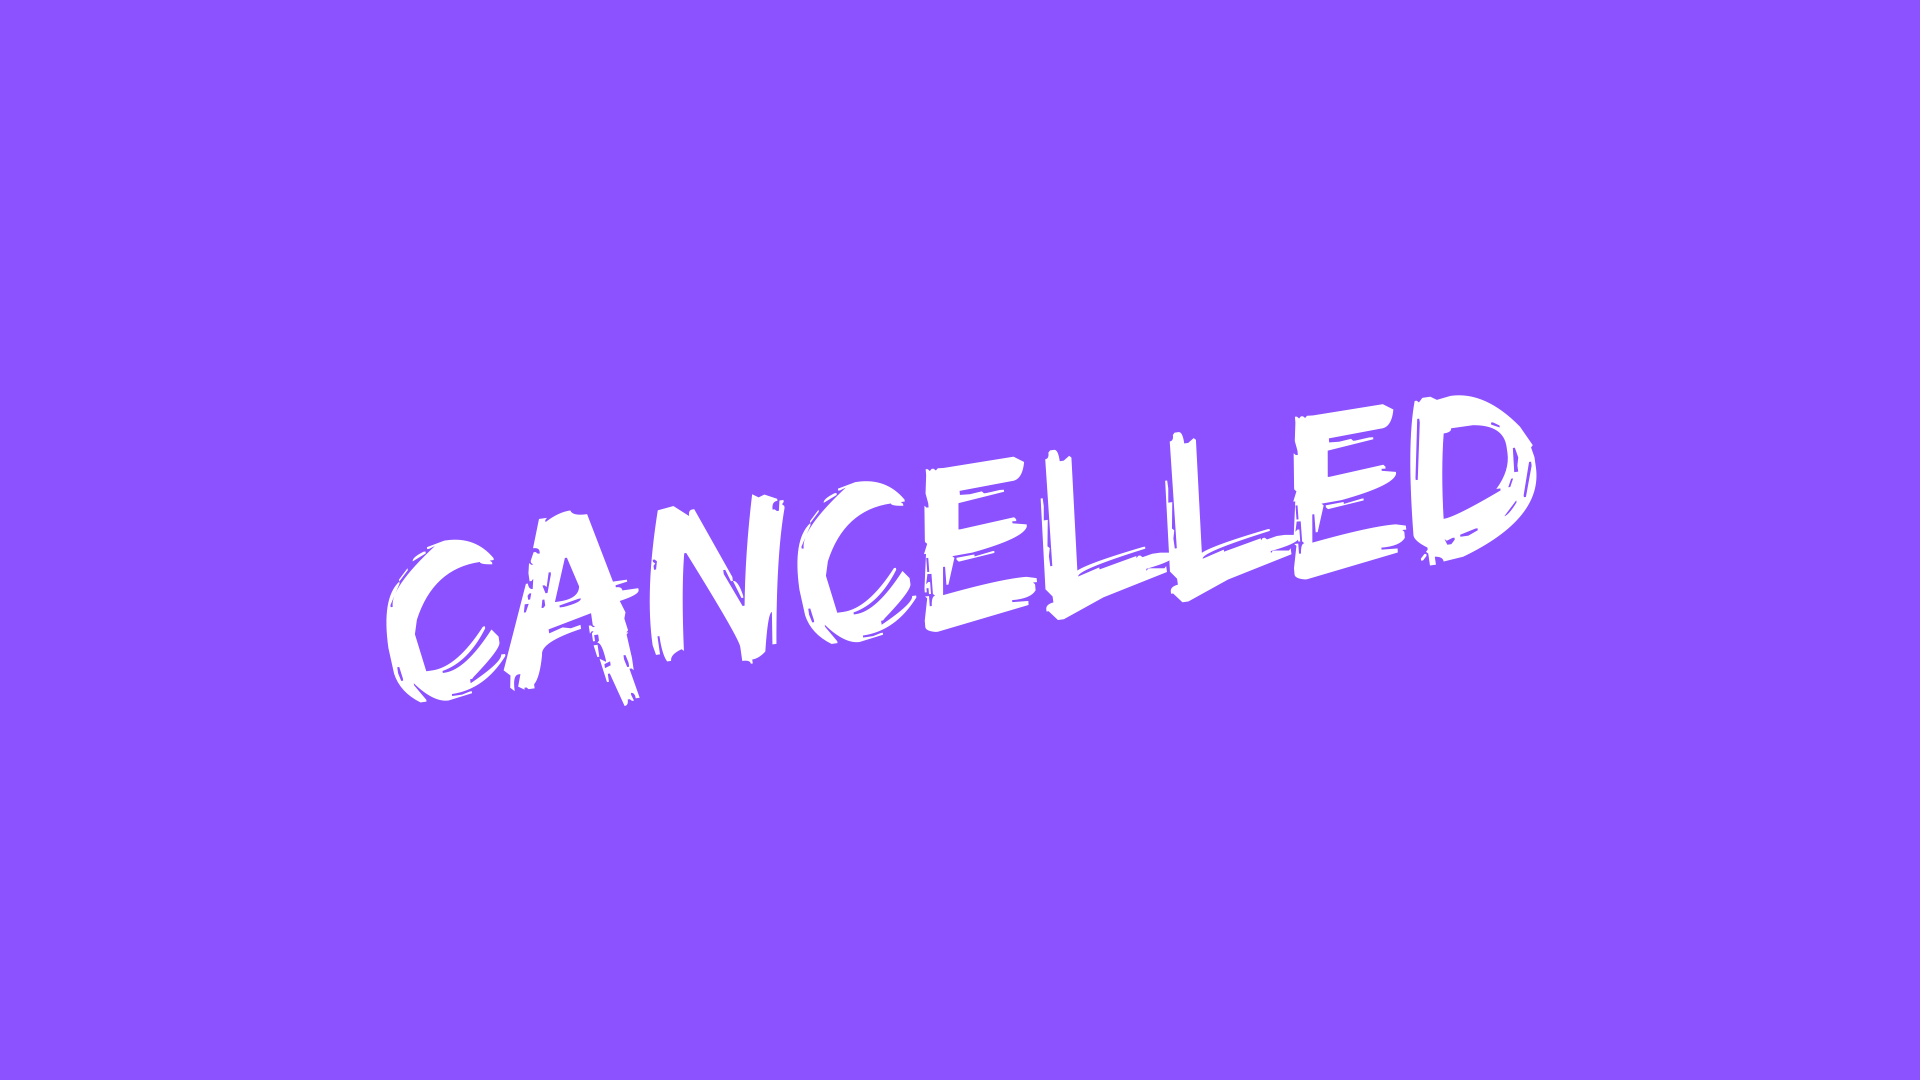 Cancelled Image